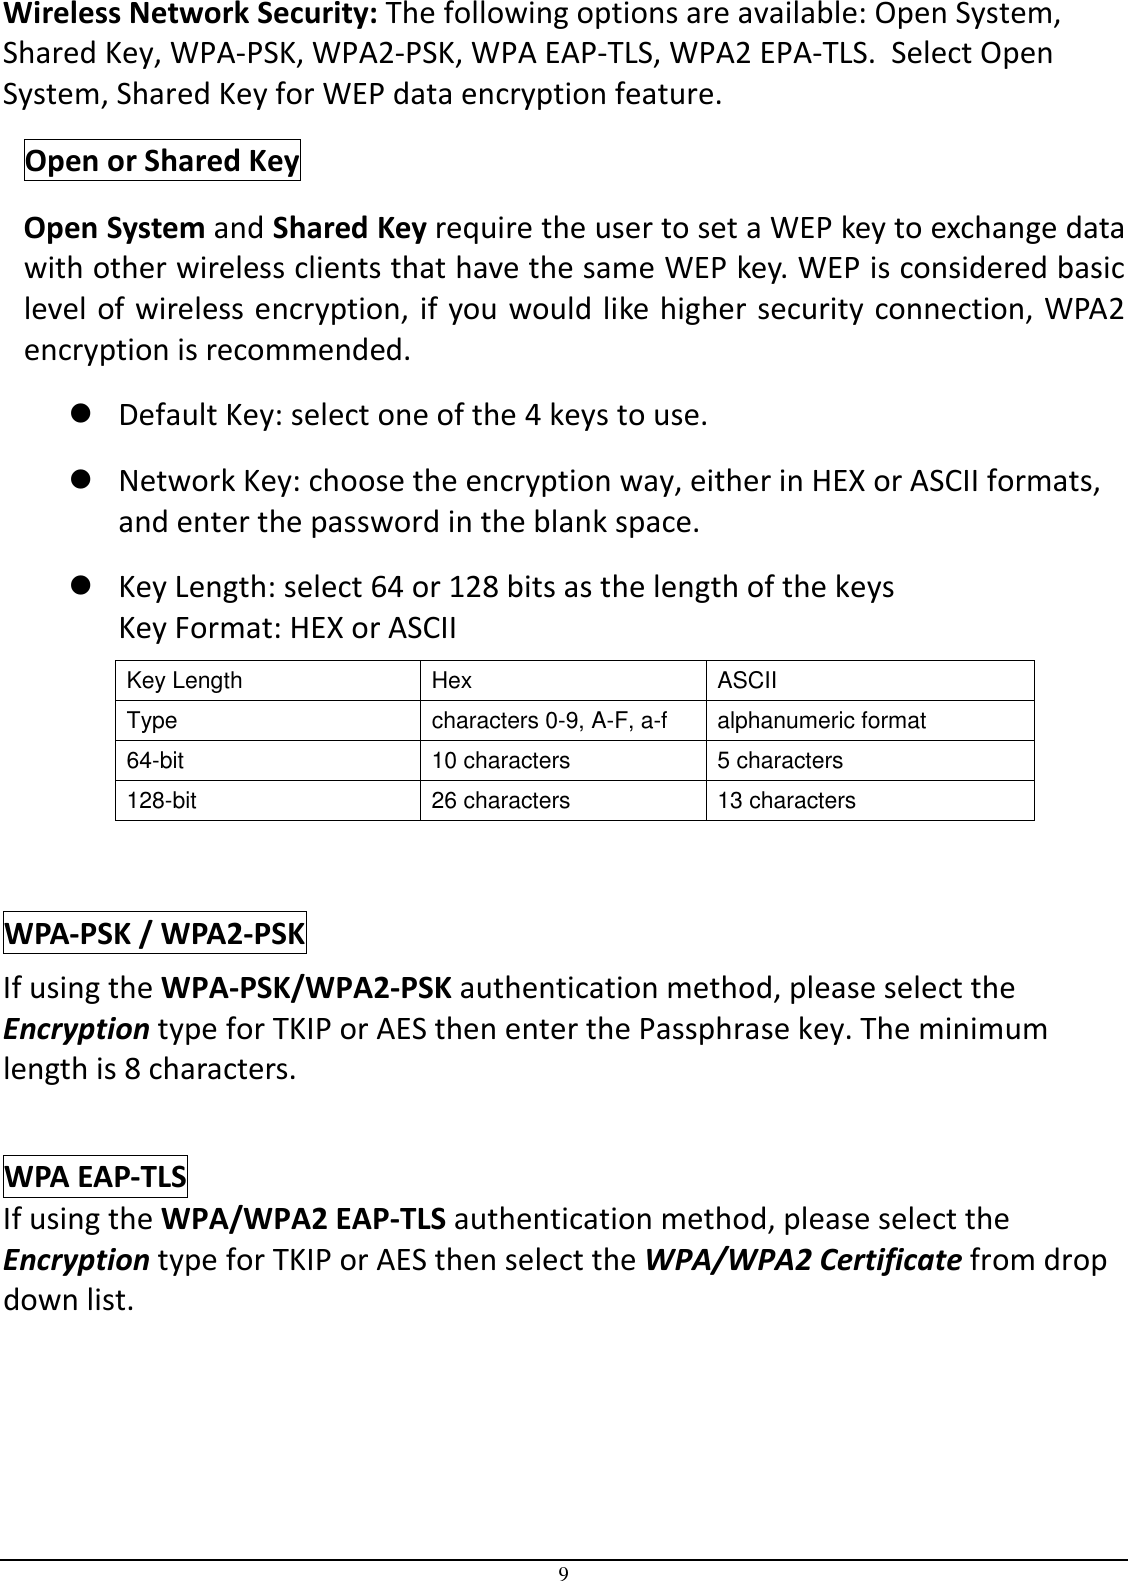 9 Wireless Network Security: The following options are available: Open System, Shared Key, WPA-PSK, WPA2-PSK, WPA EAP-TLS, WPA2 EPA-TLS.  Select Open System, Shared Key for WEP data encryption feature. Open or Shared Key Open System and Shared Key require the user to set a WEP key to exchange data with other wireless clients that have the same WEP key. WEP is considered basic level of wireless encryption, if you would like higher security connection, WPA2 encryption is recommended.   Default Key: select one of the 4 keys to use.  Network Key: choose the encryption way, either in HEX or ASCII formats, and enter the password in the blank space.   Key Length: select 64 or 128 bits as the length of the keys Key Format: HEX or ASCII Key Length  Hex  ASCII Type  characters 0-9, A-F, a-f  alphanumeric format 64-bit  10 characters  5 characters 128-bit  26 characters  13 characters  WPA-PSK / WPA2-PSK If using the WPA-PSK/WPA2-PSK authentication method, please select the Encryption type for TKIP or AES then enter the Passphrase key. The minimum length is 8 characters.   WPA EAP-TLS If using the WPA/WPA2 EAP-TLS authentication method, please select the Encryption type for TKIP or AES then select the WPA/WPA2 Certificate from drop down list.      